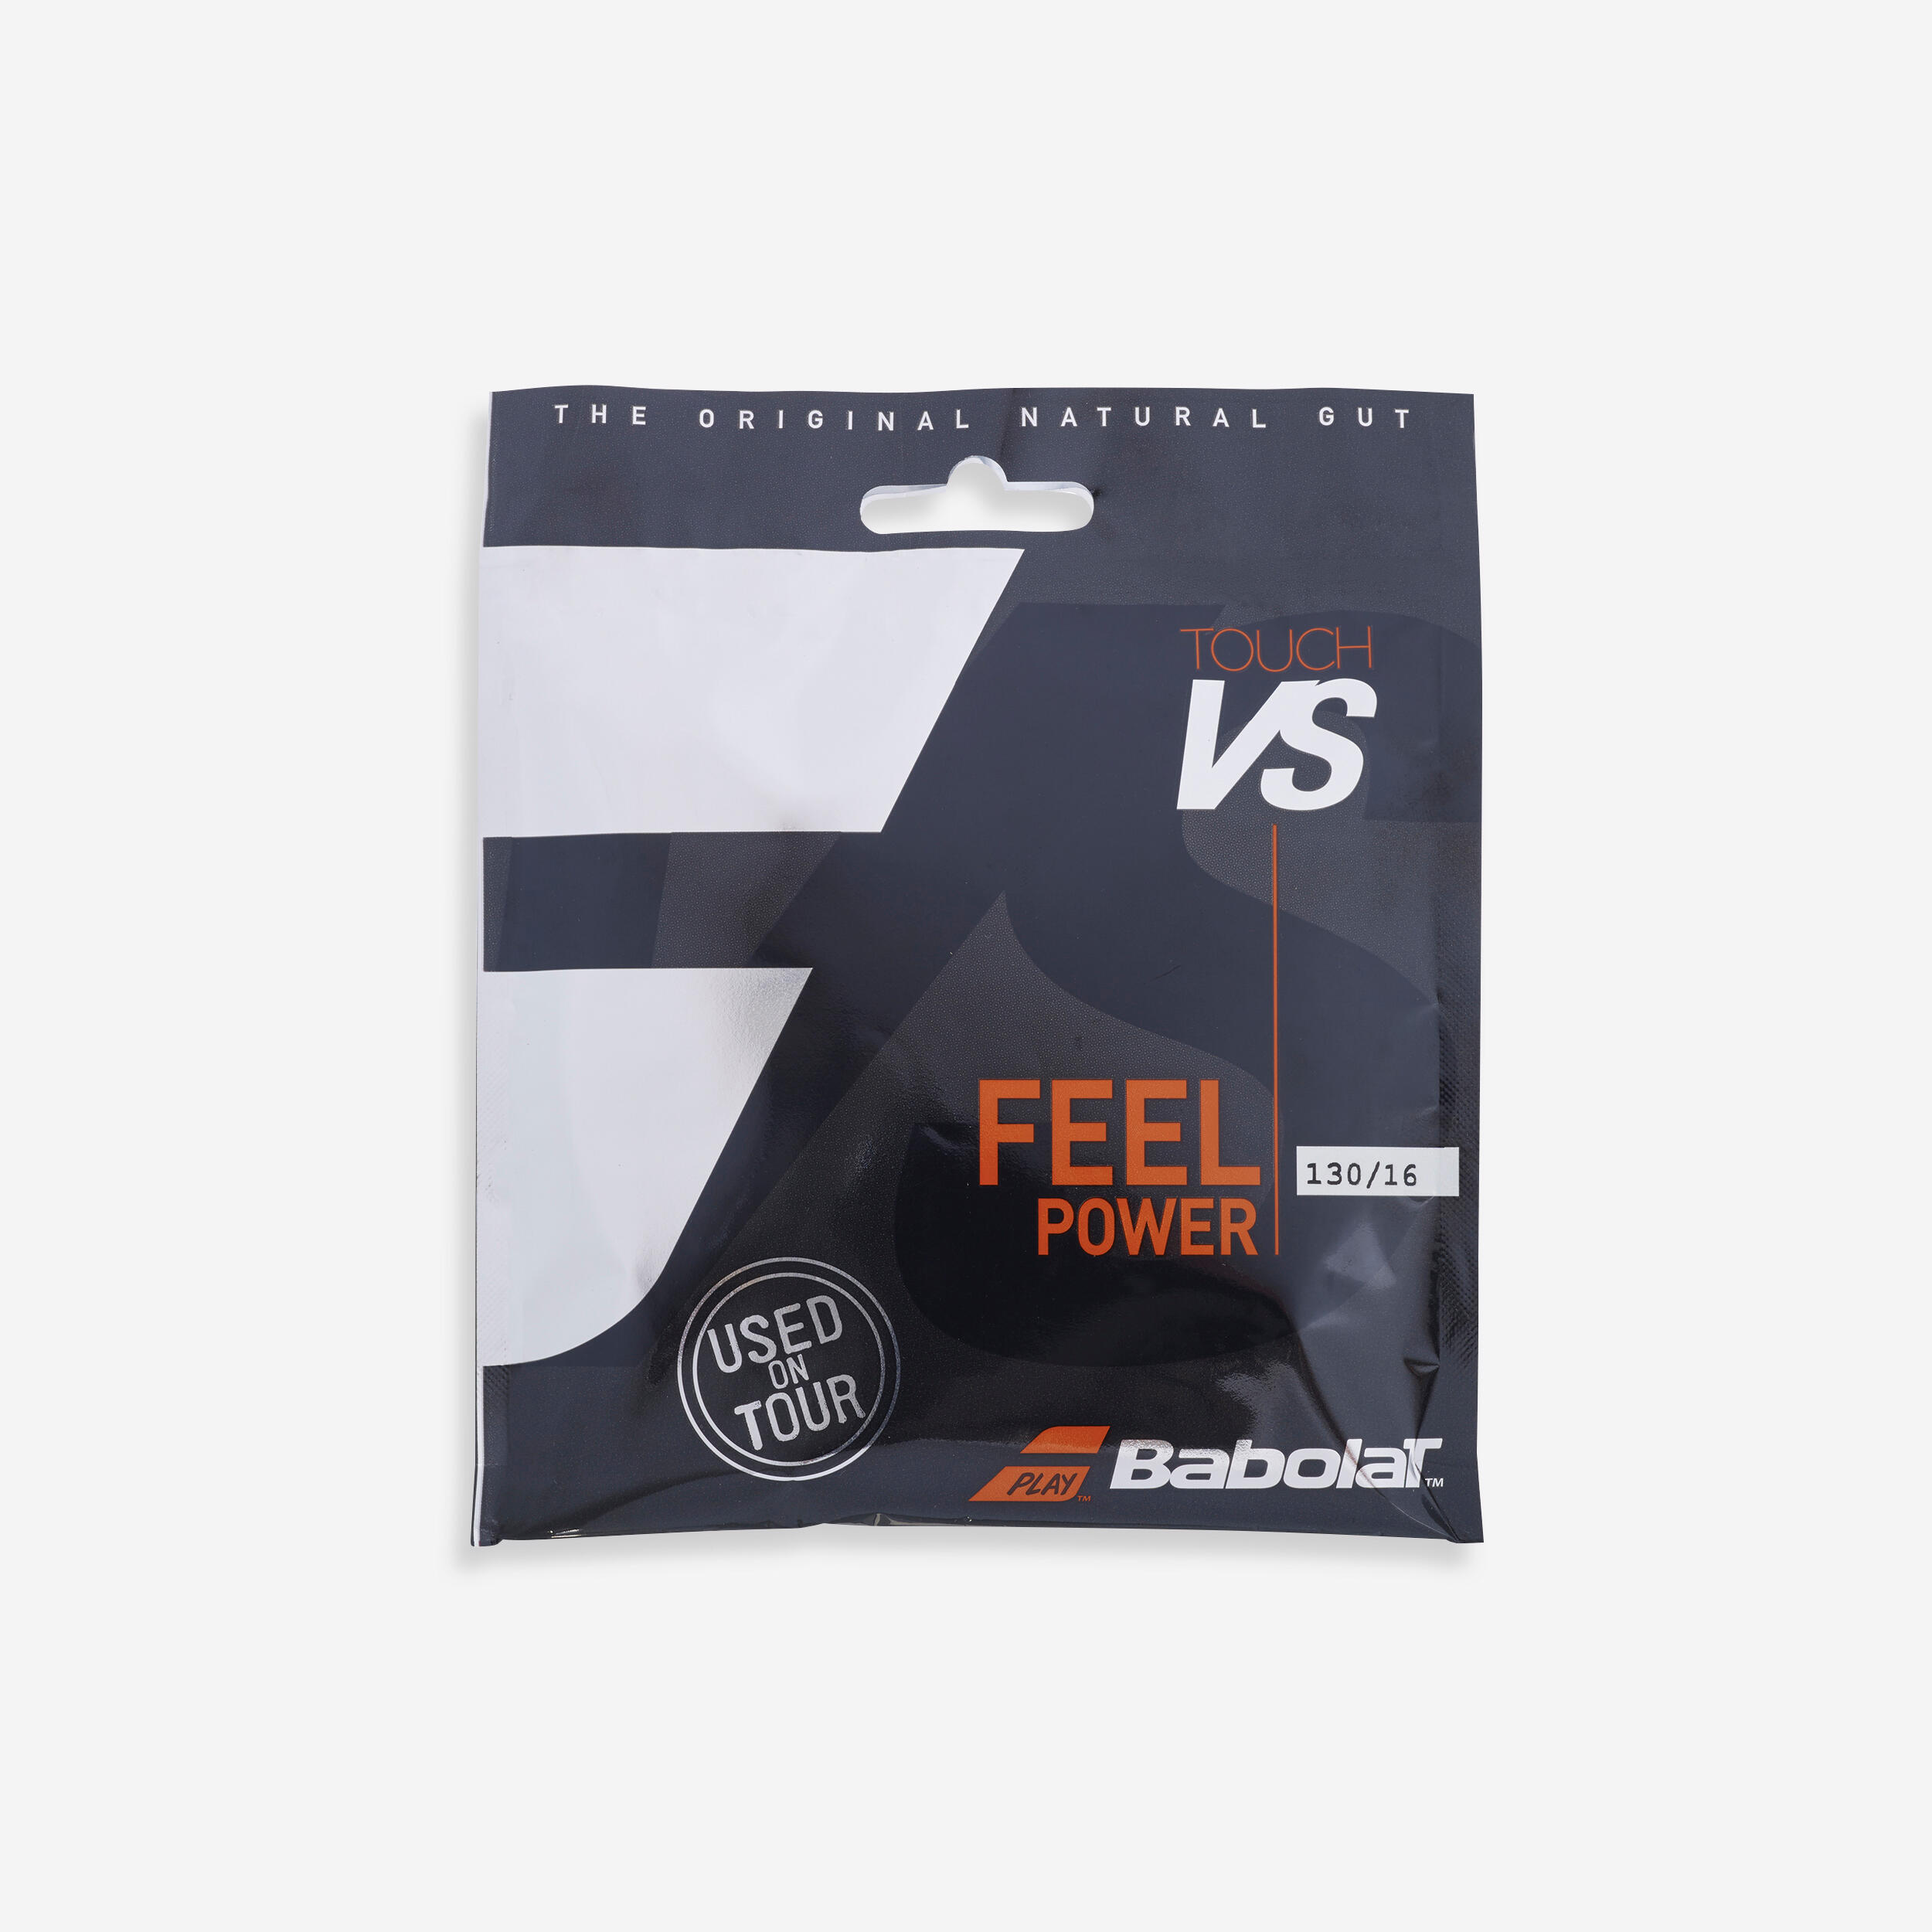 BABOLAT Natural Gut Tennis String Touch VS 1.30 mm